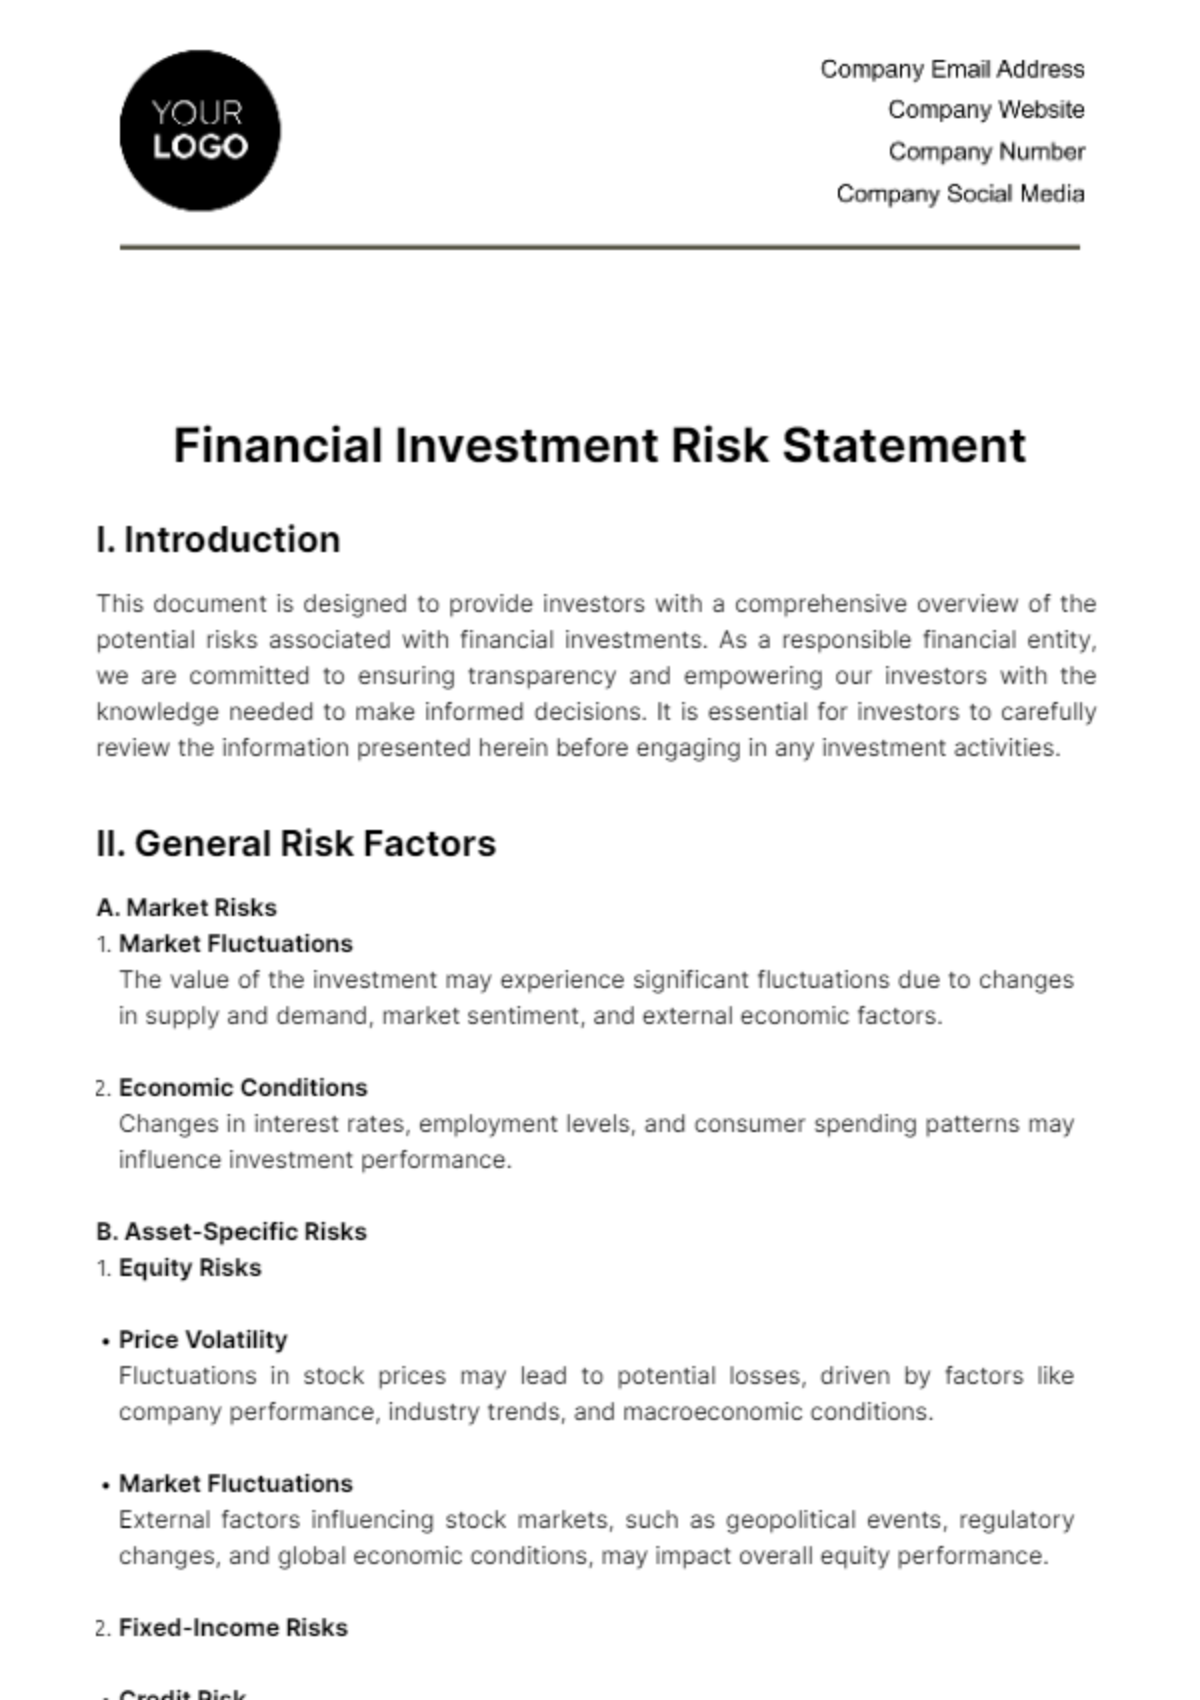 Financial Investment Risk Statement Template